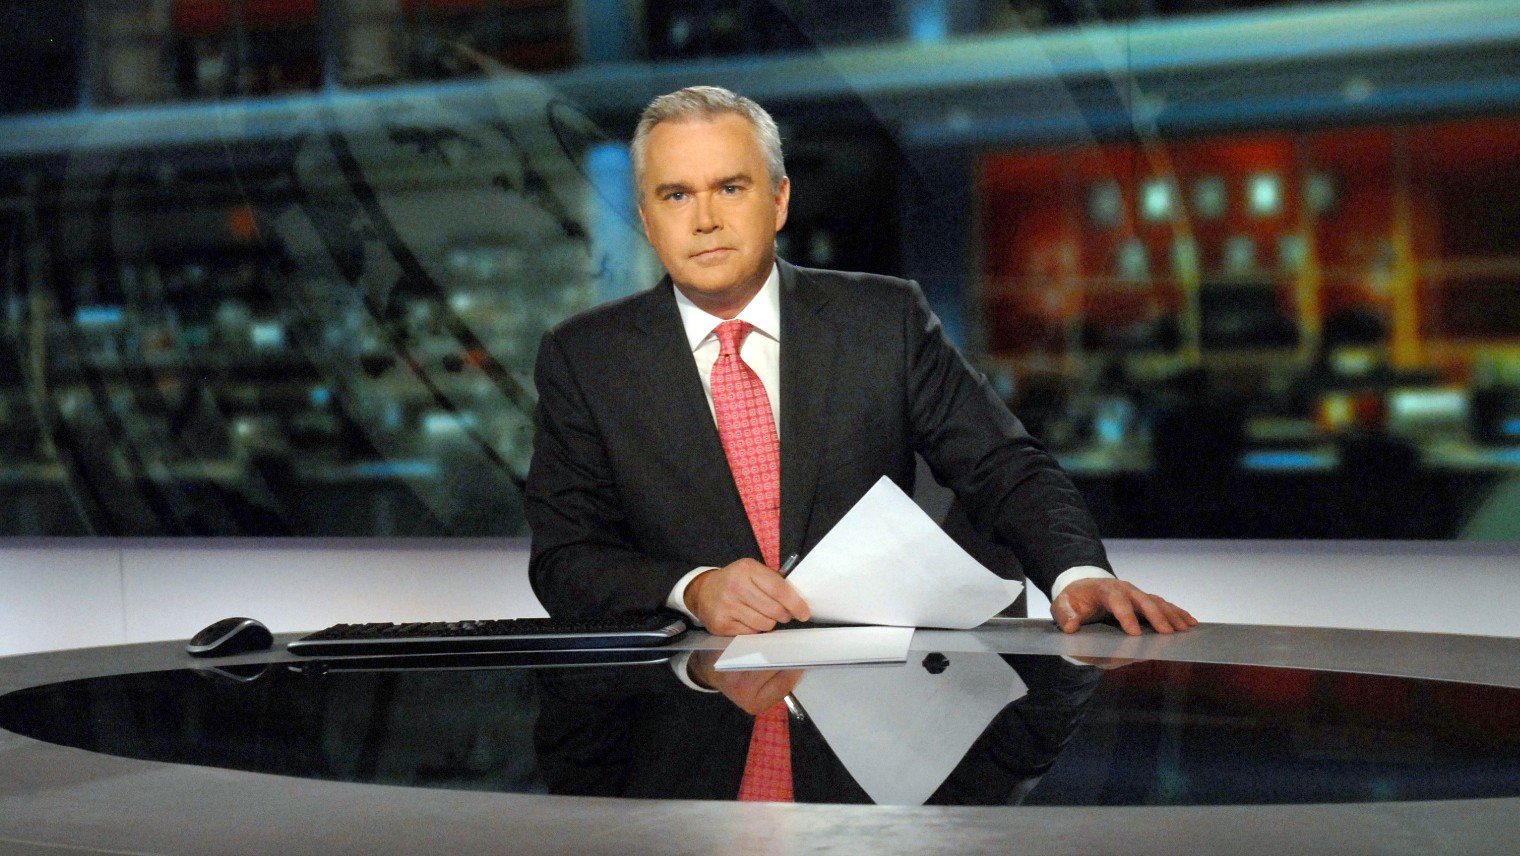 Huw Edwards named as presenter at centre of BBC crisis The Week pic